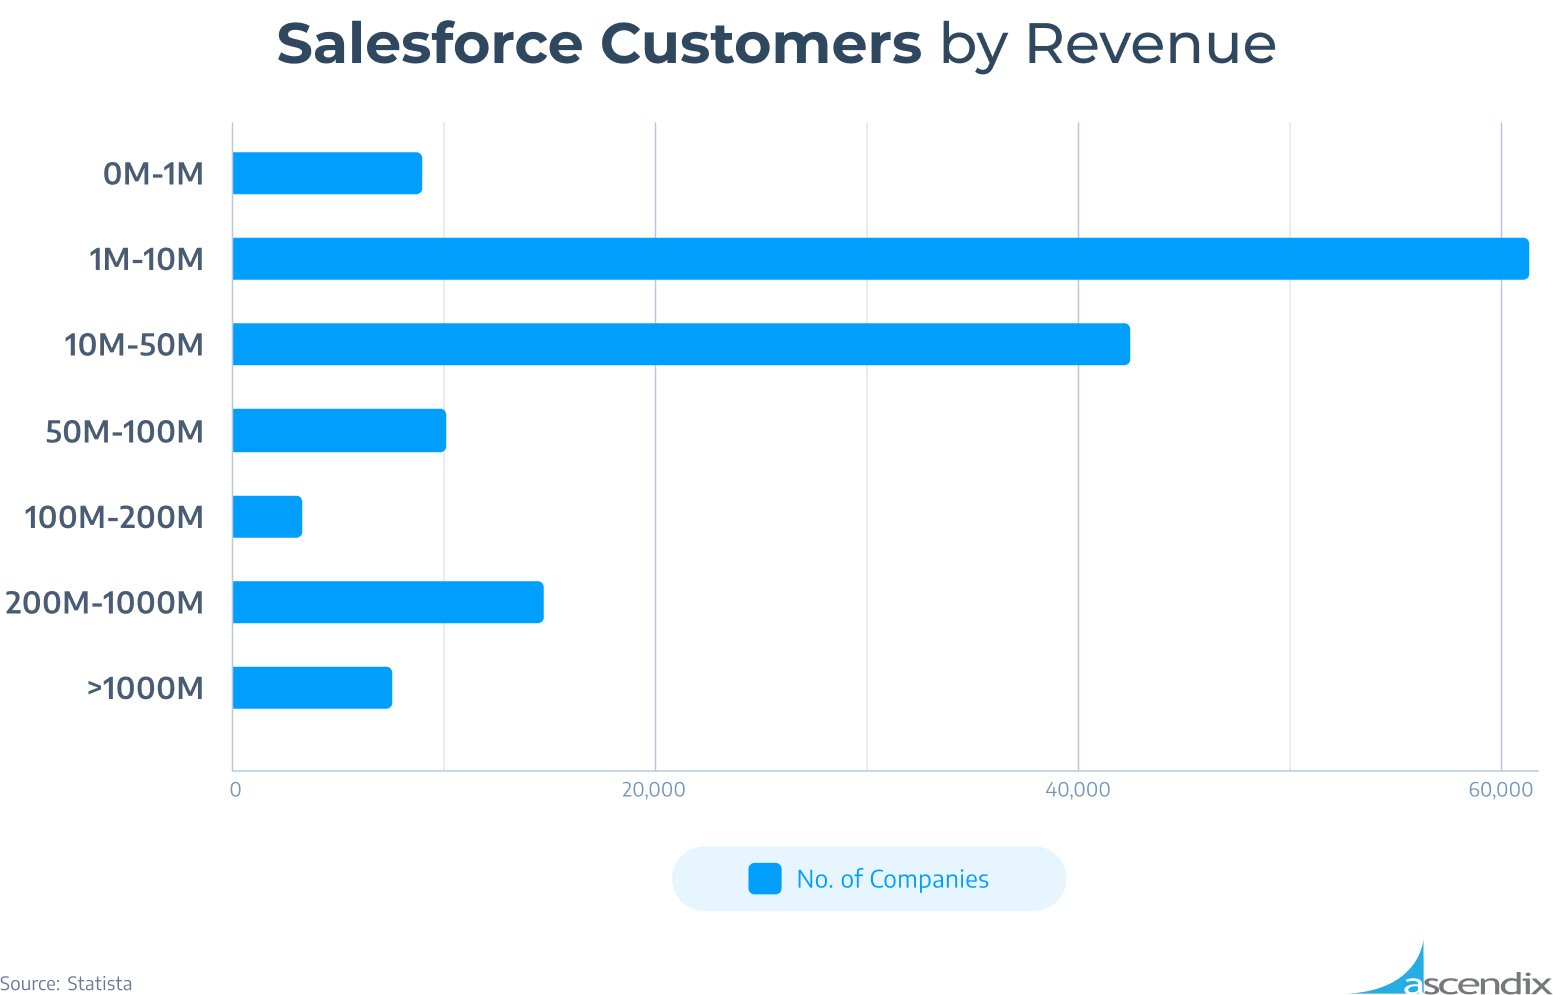 Bar chart showing the division of Salesforce customers by revenue